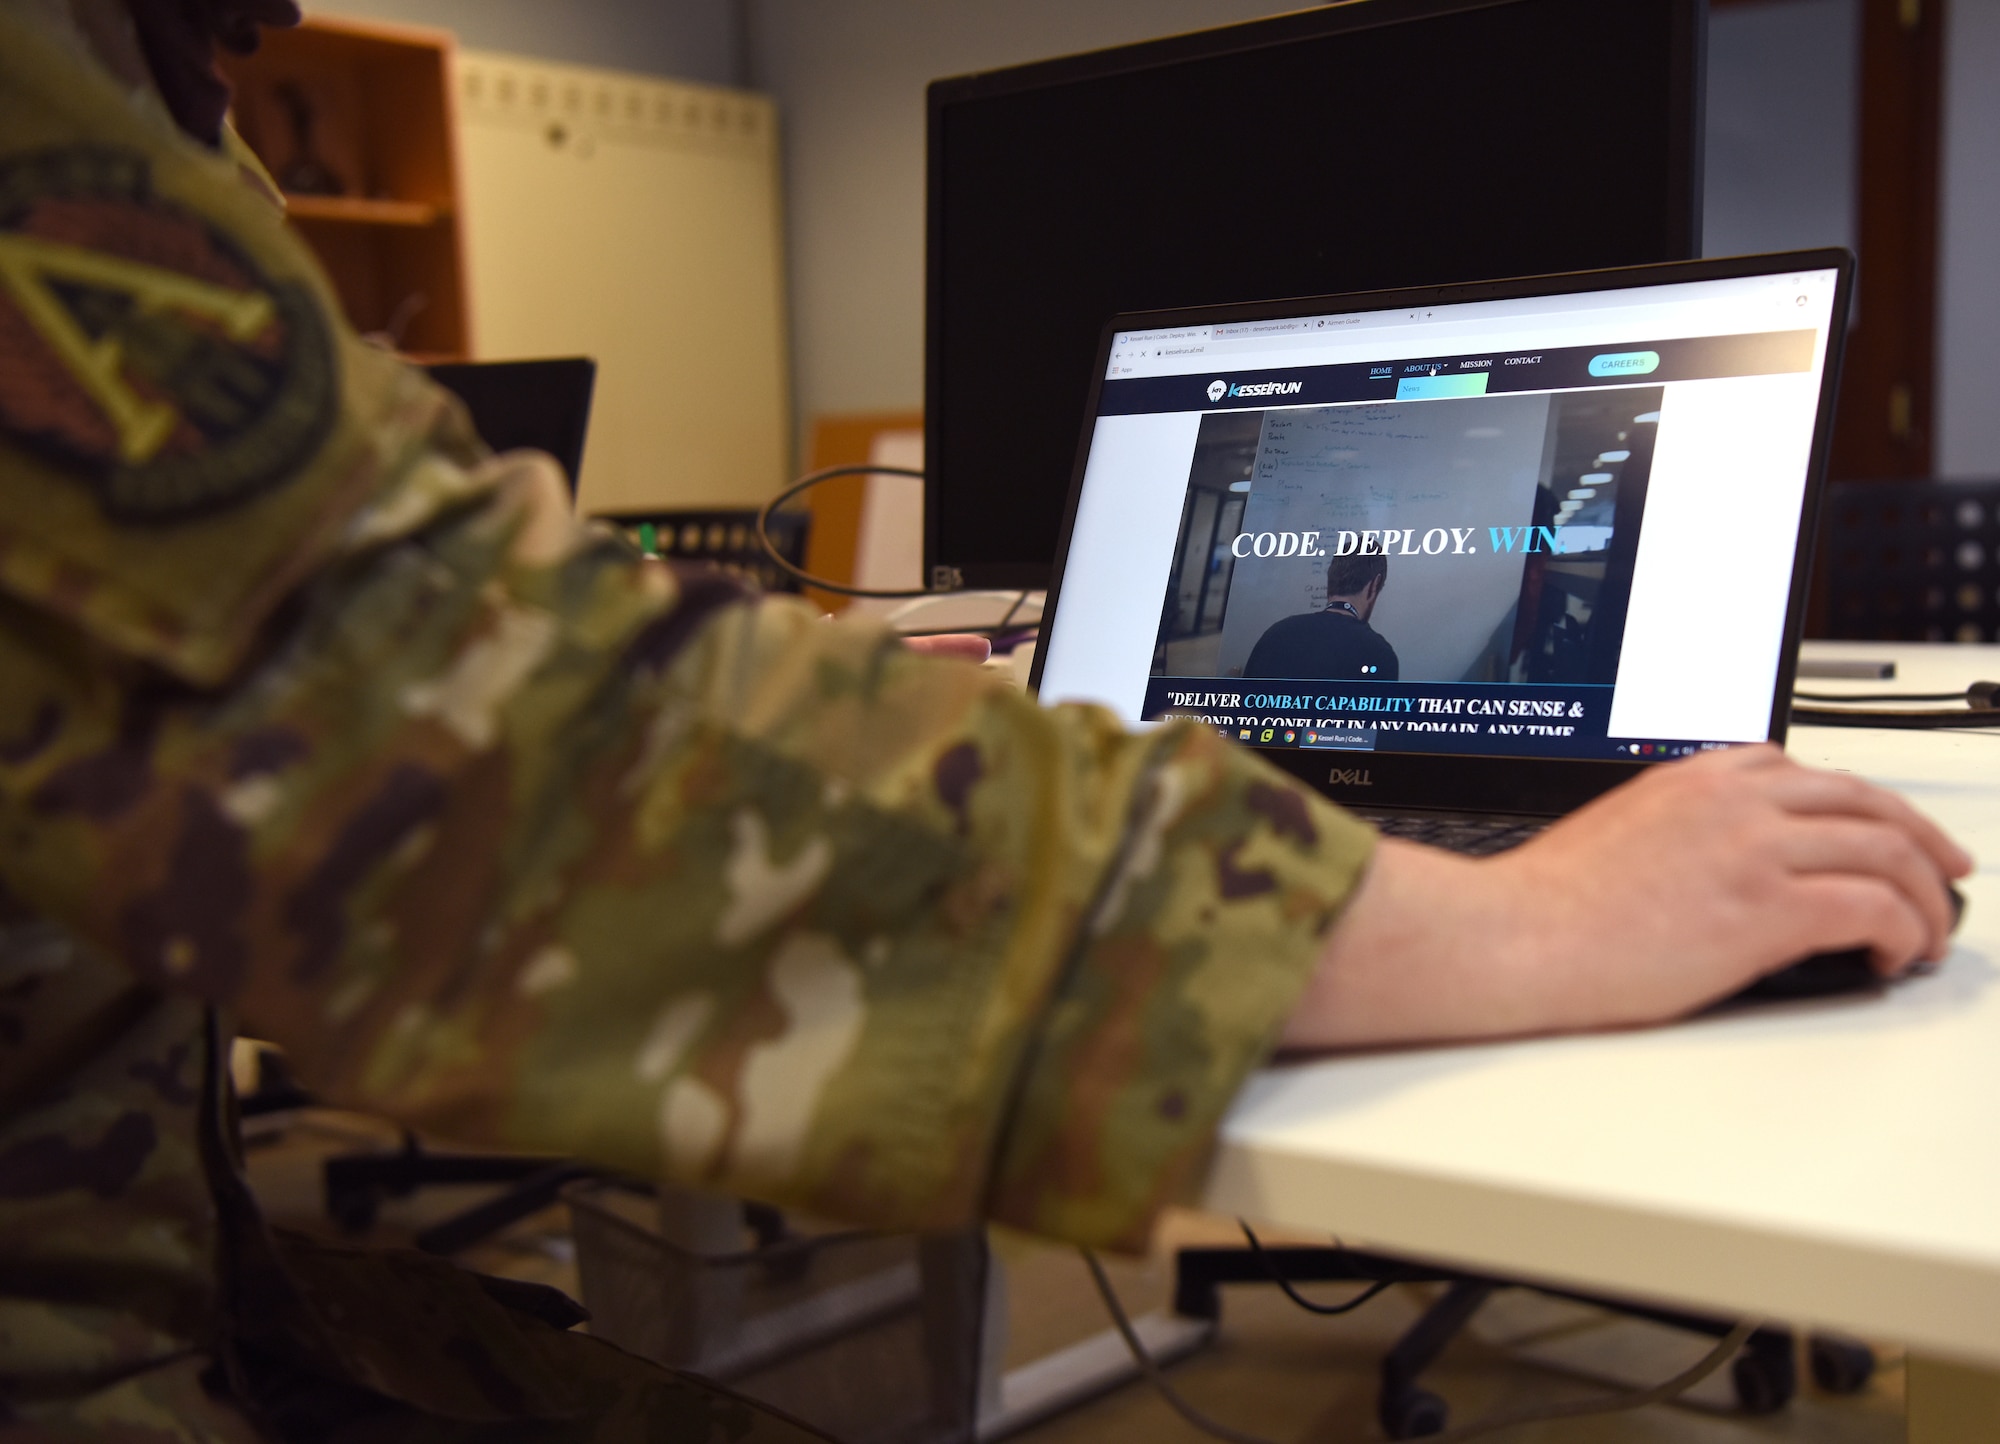 The AFCENT innovation officer connects Airmen in the AOR with the resources to accomplish their innovative vision.